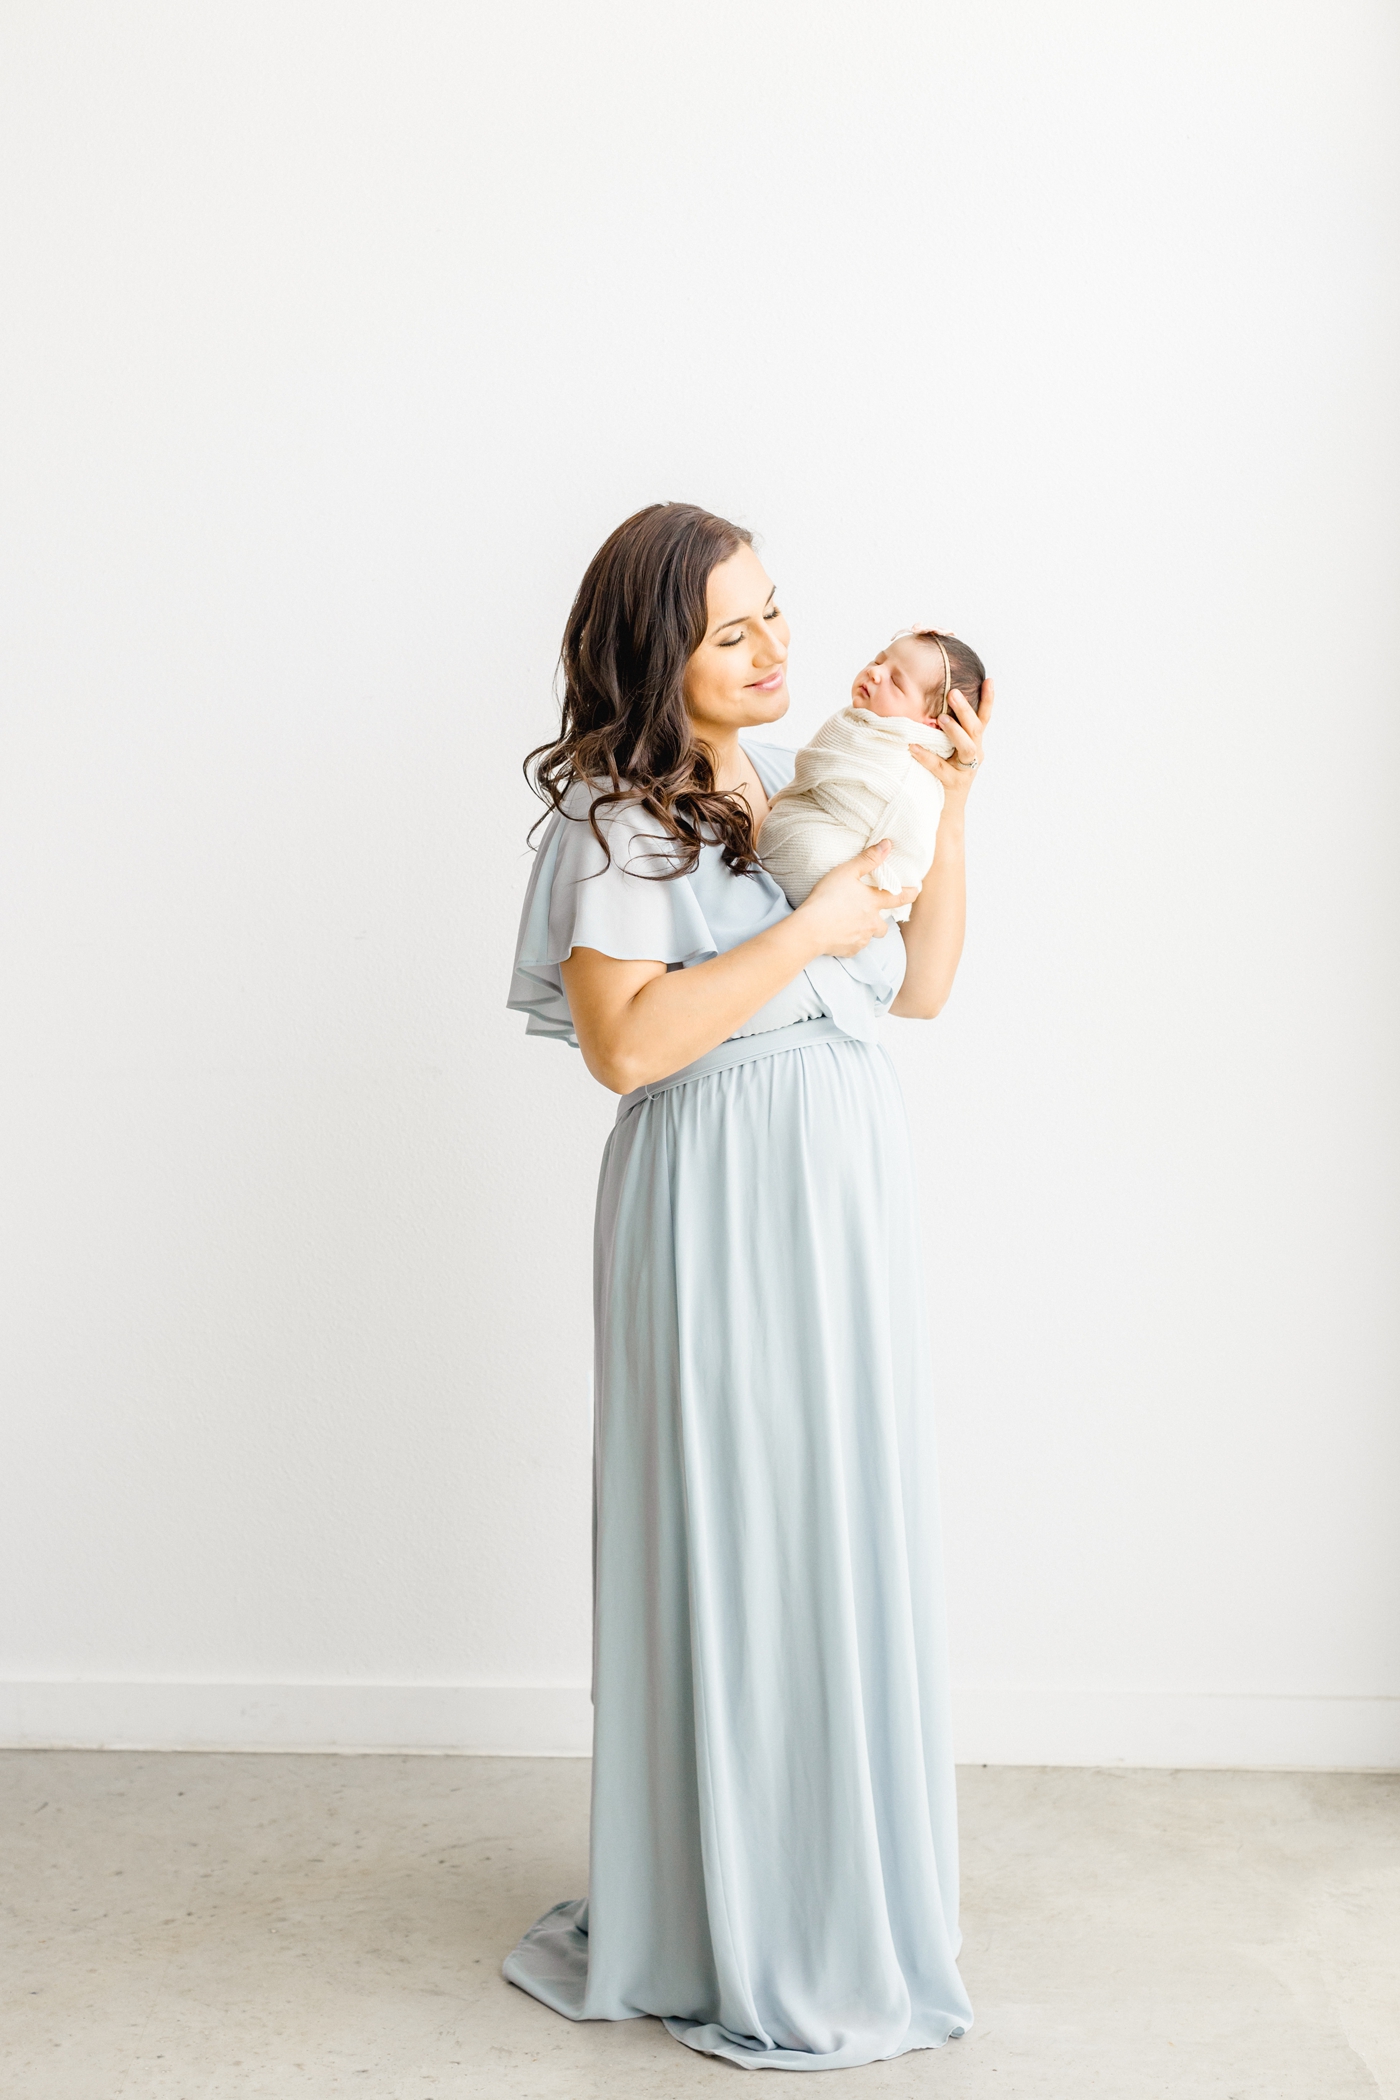 Mom holding swaddled baby during Cedar Park newborn session. Photo by Sana Ahmed Photography.